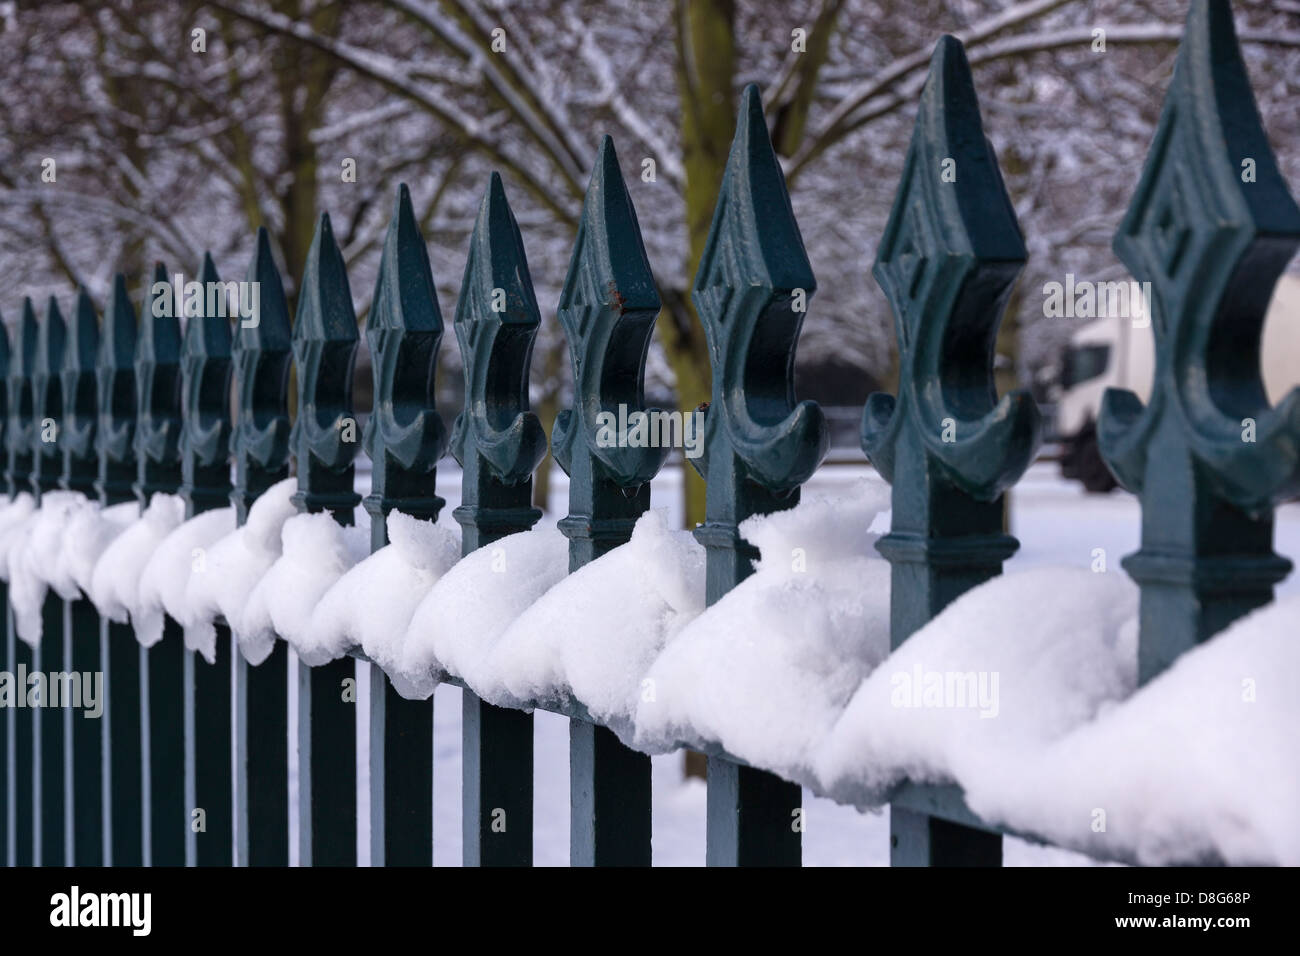 Snowy iron metal fence railings with spear shaped finials, UK Stock Photo